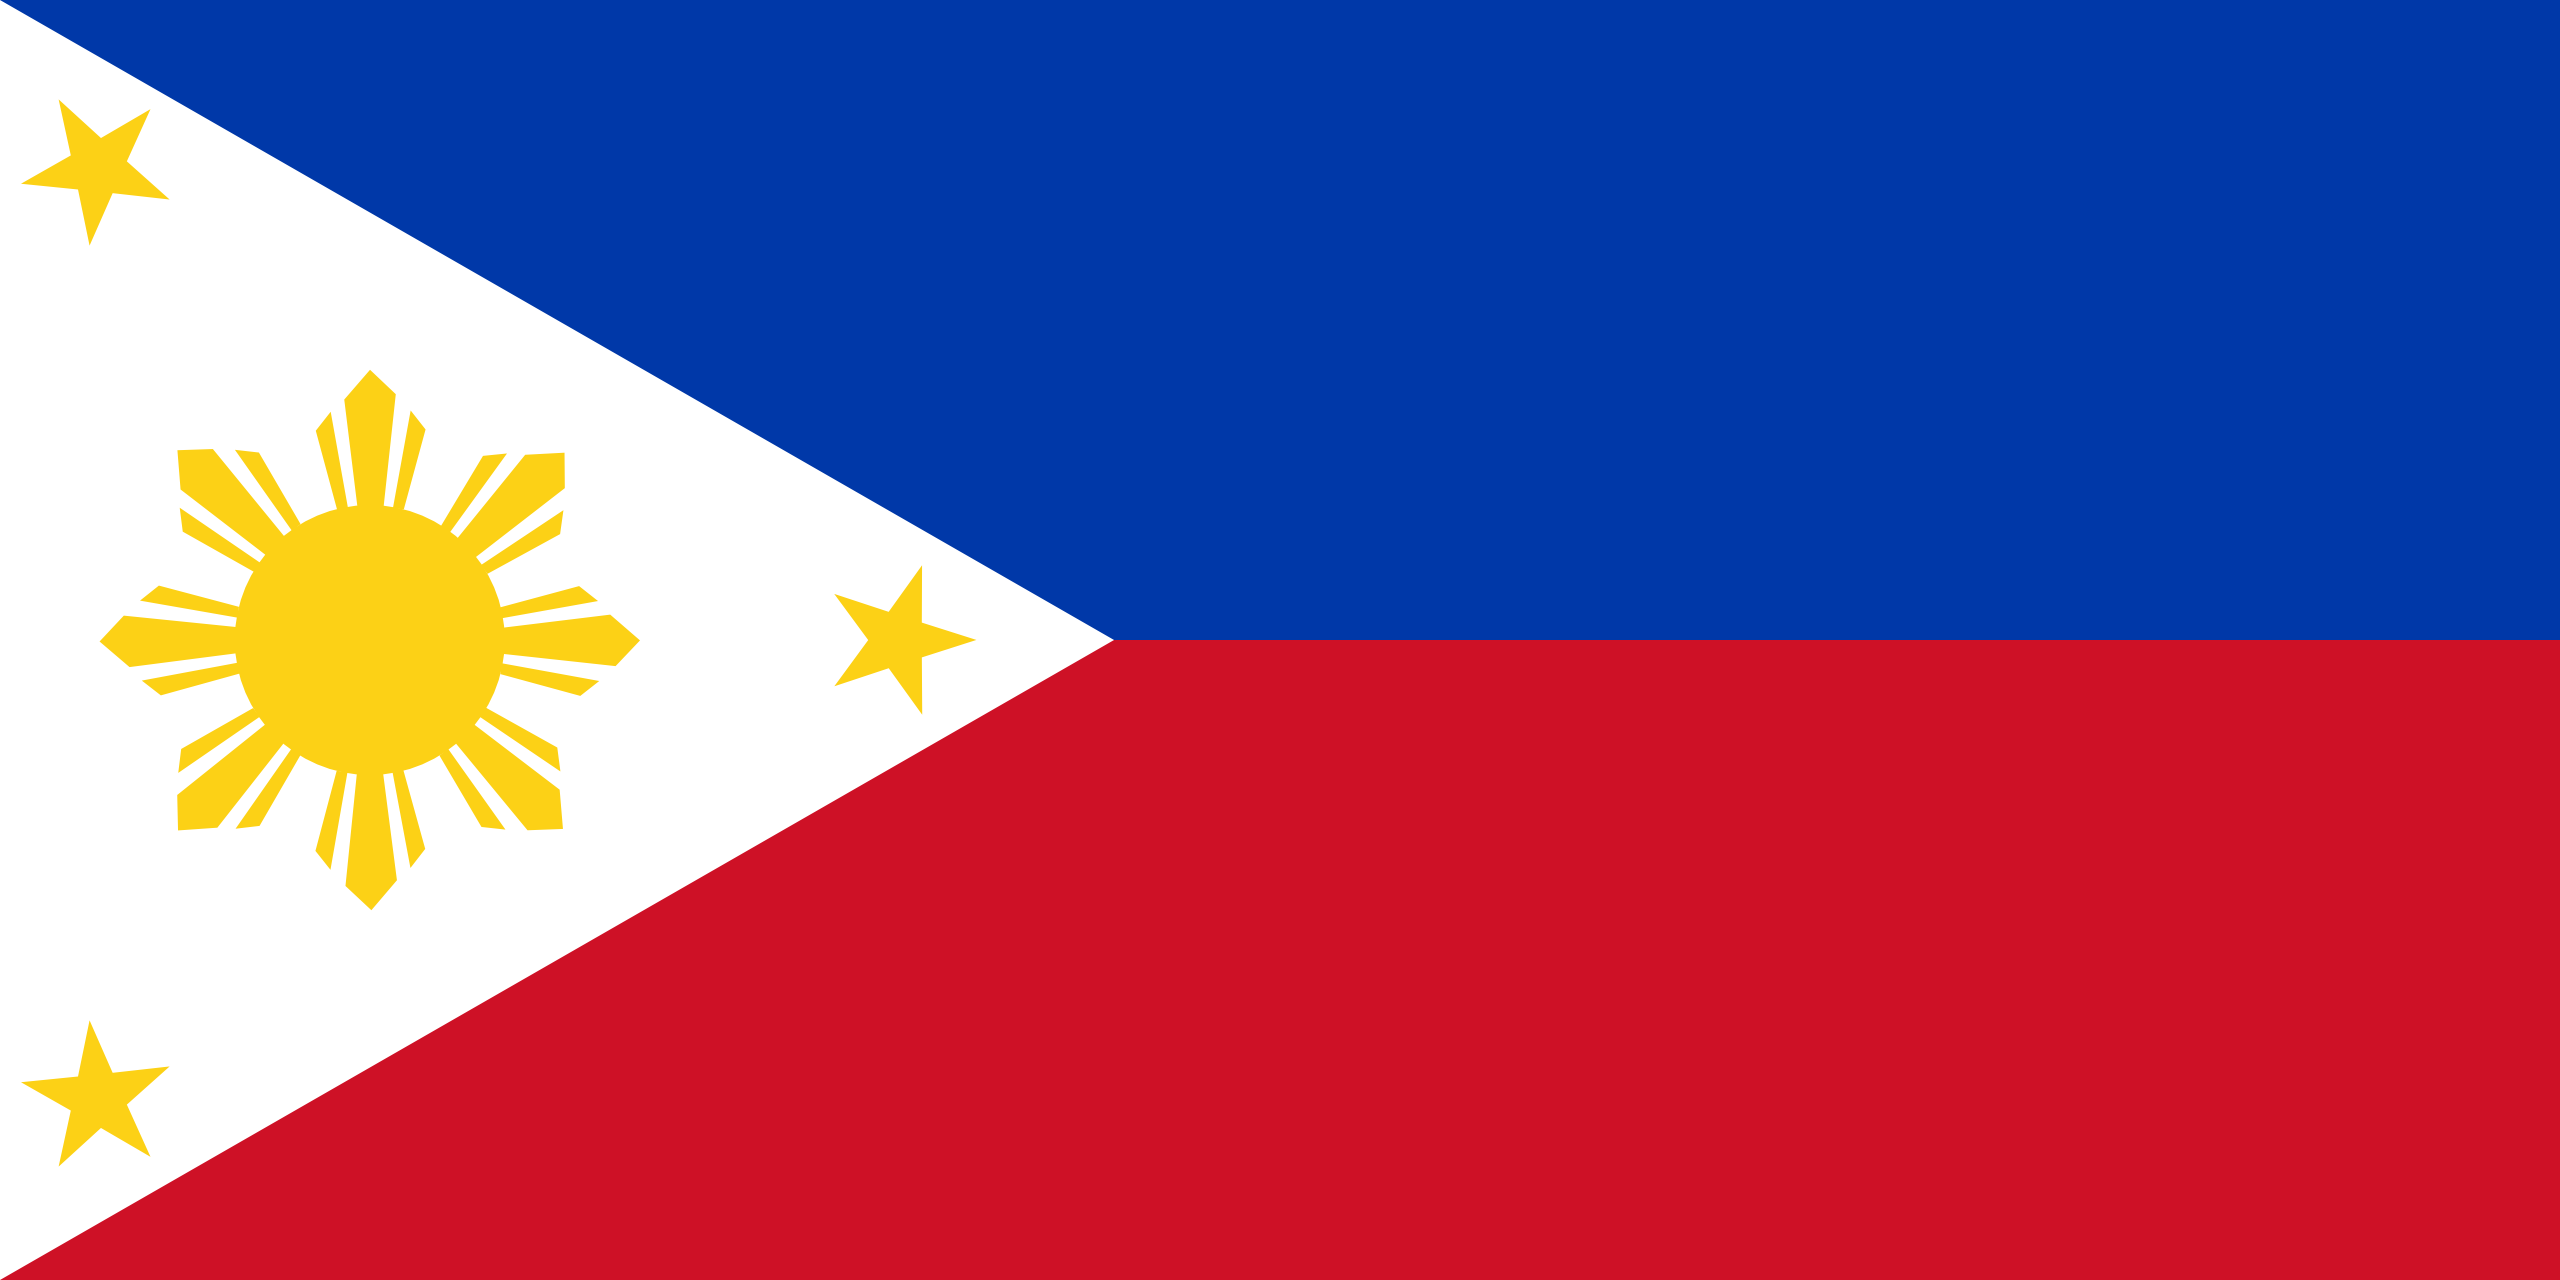 philippine flag | Philippines | Flags of countries | Flags Of The ...